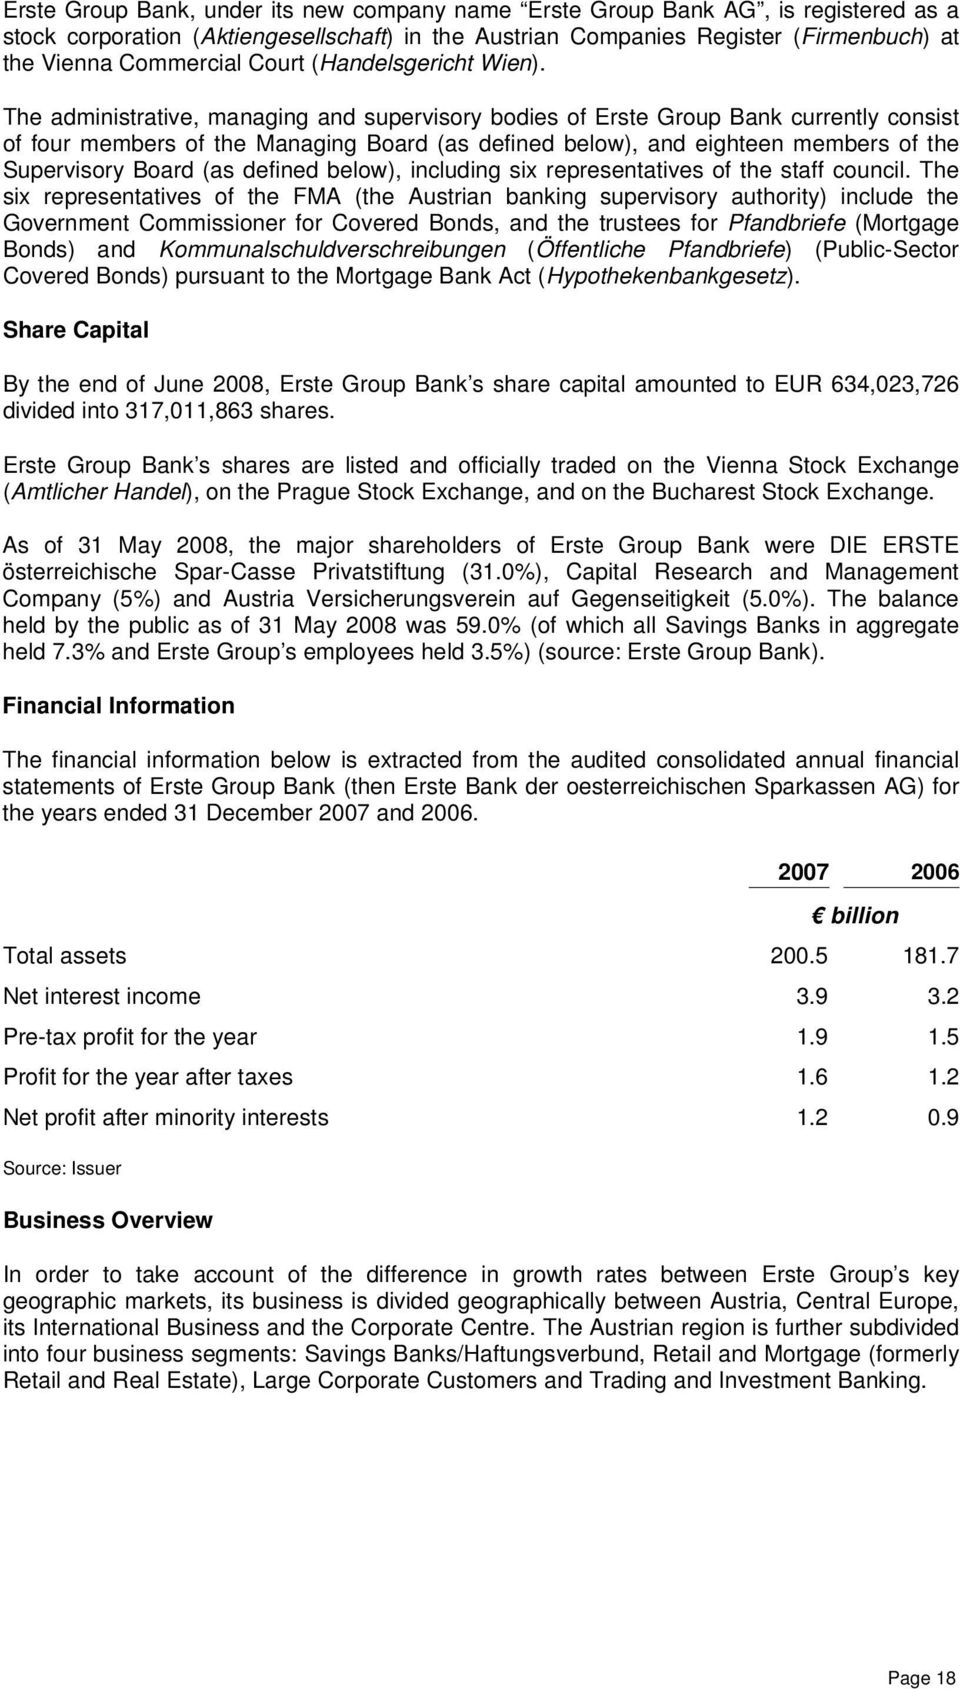 The administrative, managing and supervisory bodies of Erste Group Bank currently consist of four members of the Managing Board (as defined below), and eighteen members of the Supervisory Board (as